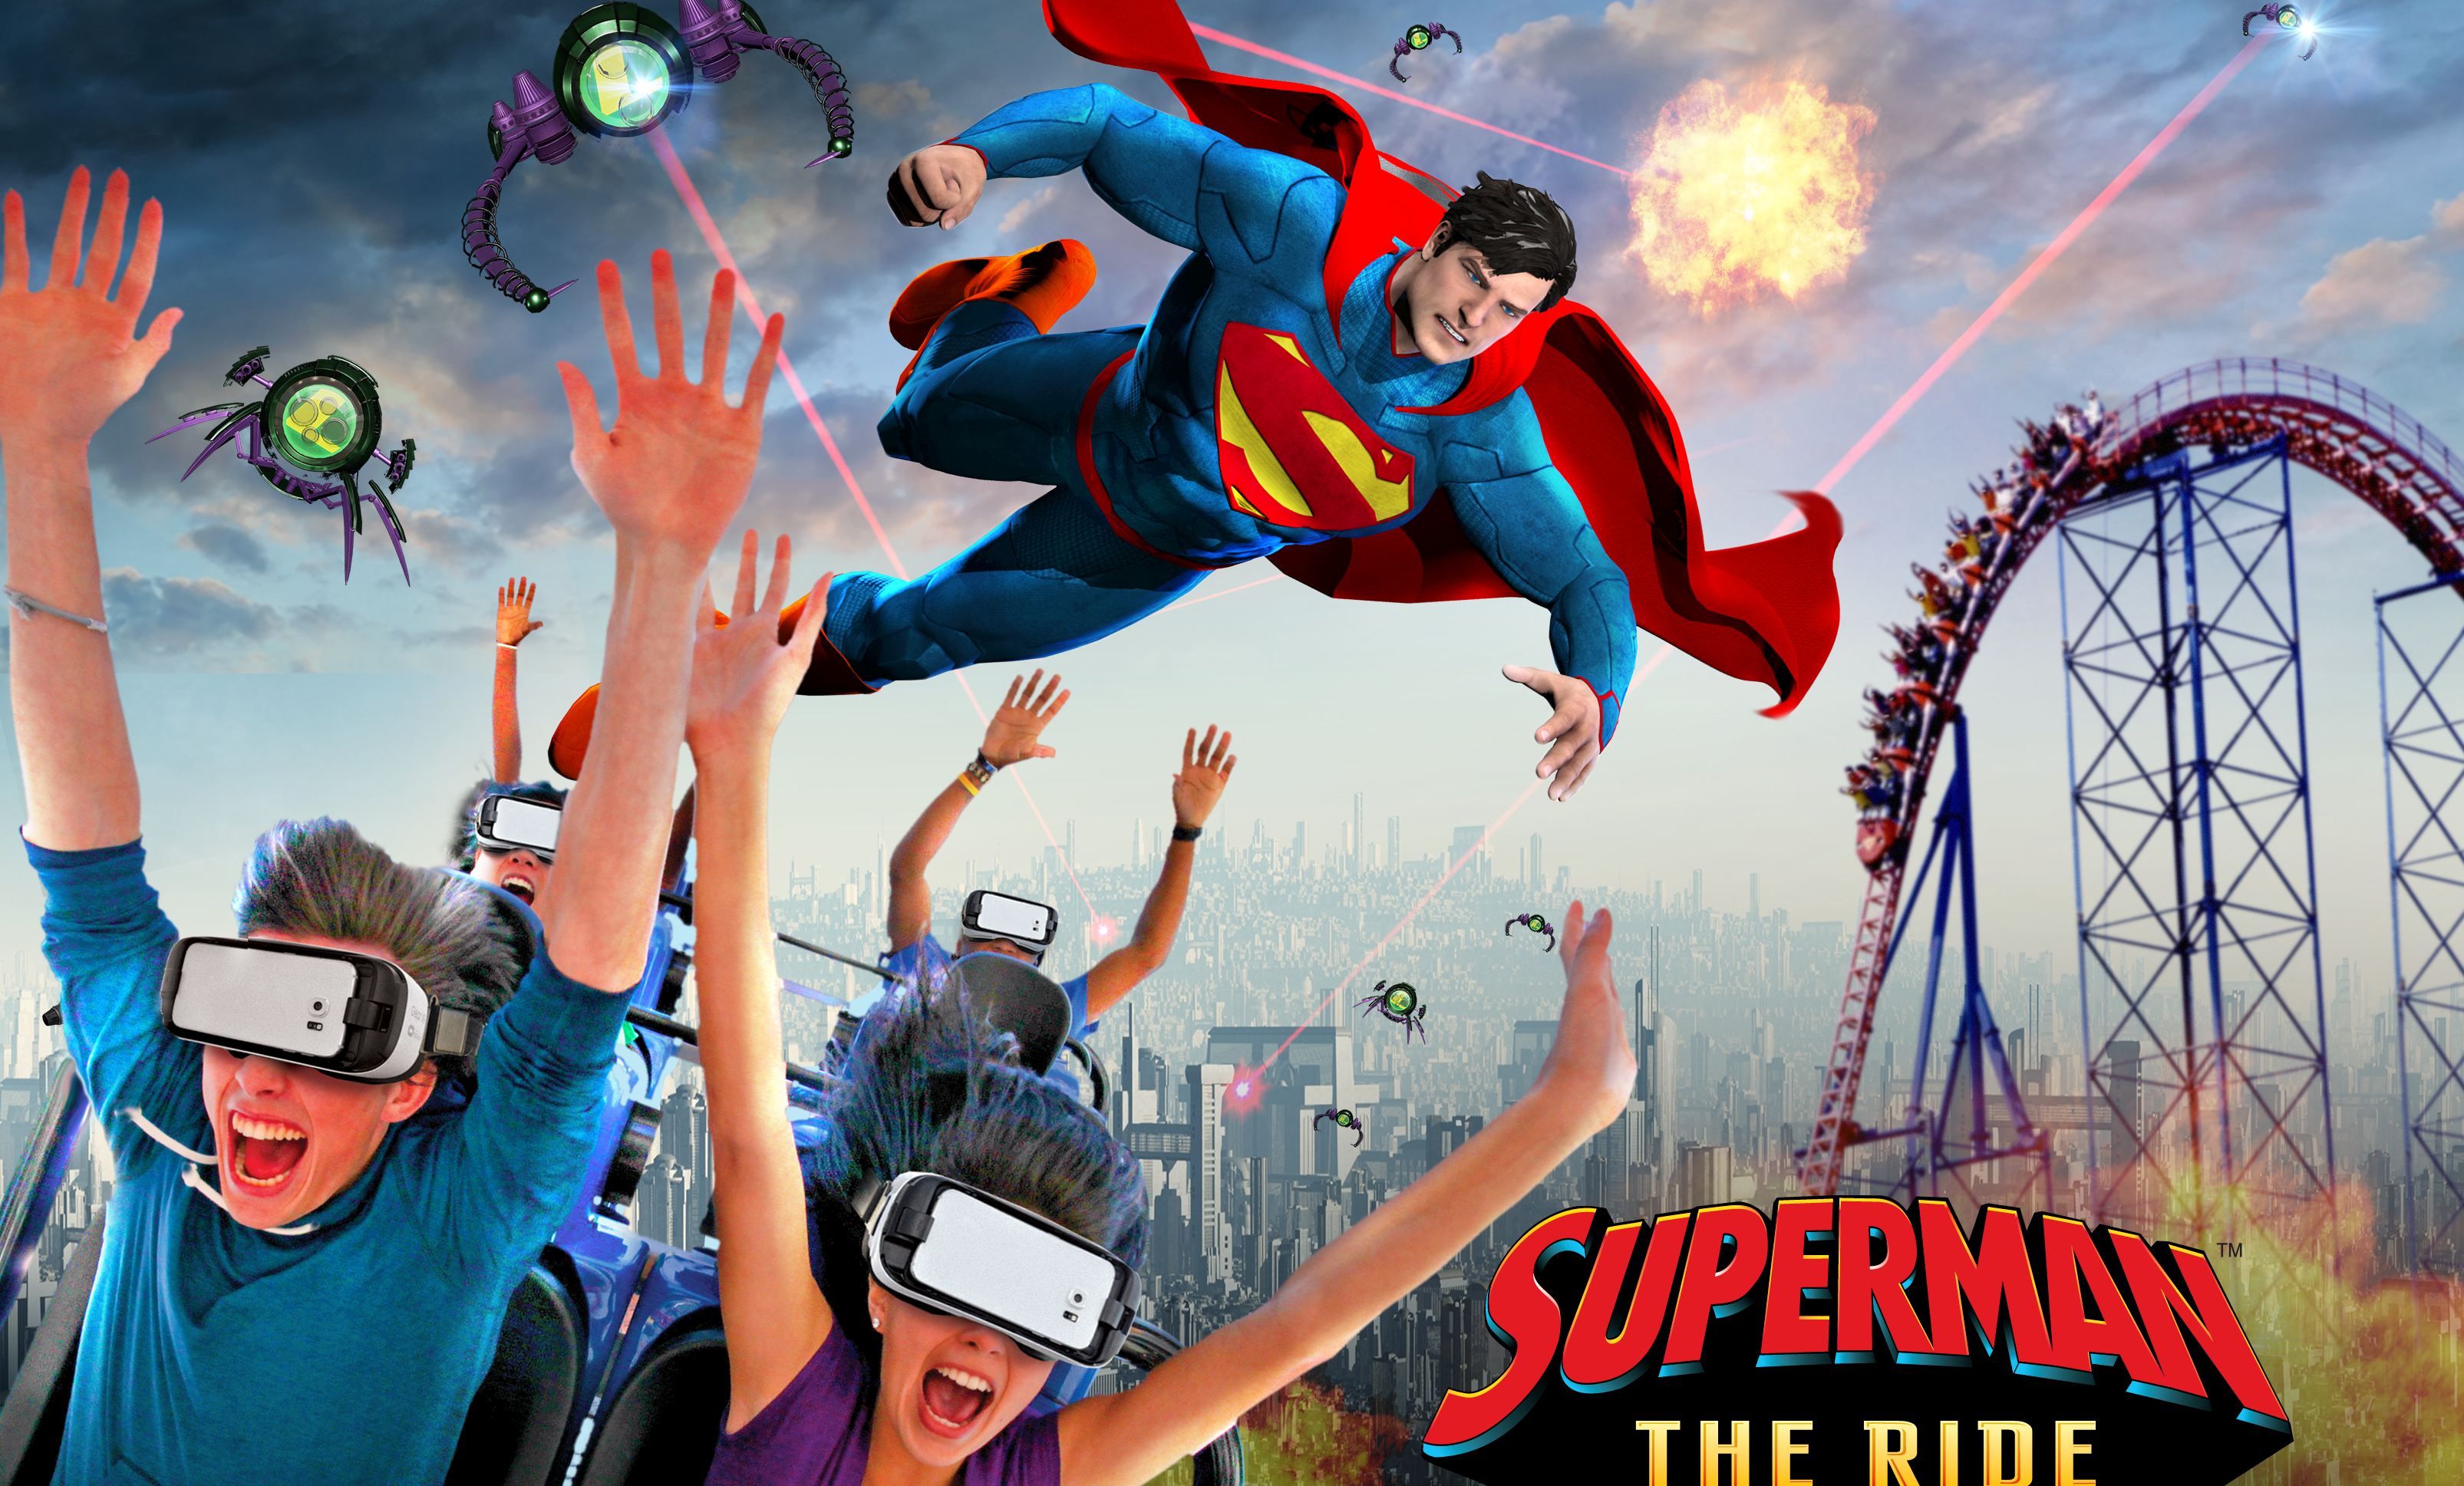 Basket purity Confuse Six Flags to provide virtual reality on roller-coaster rides | Computerworld